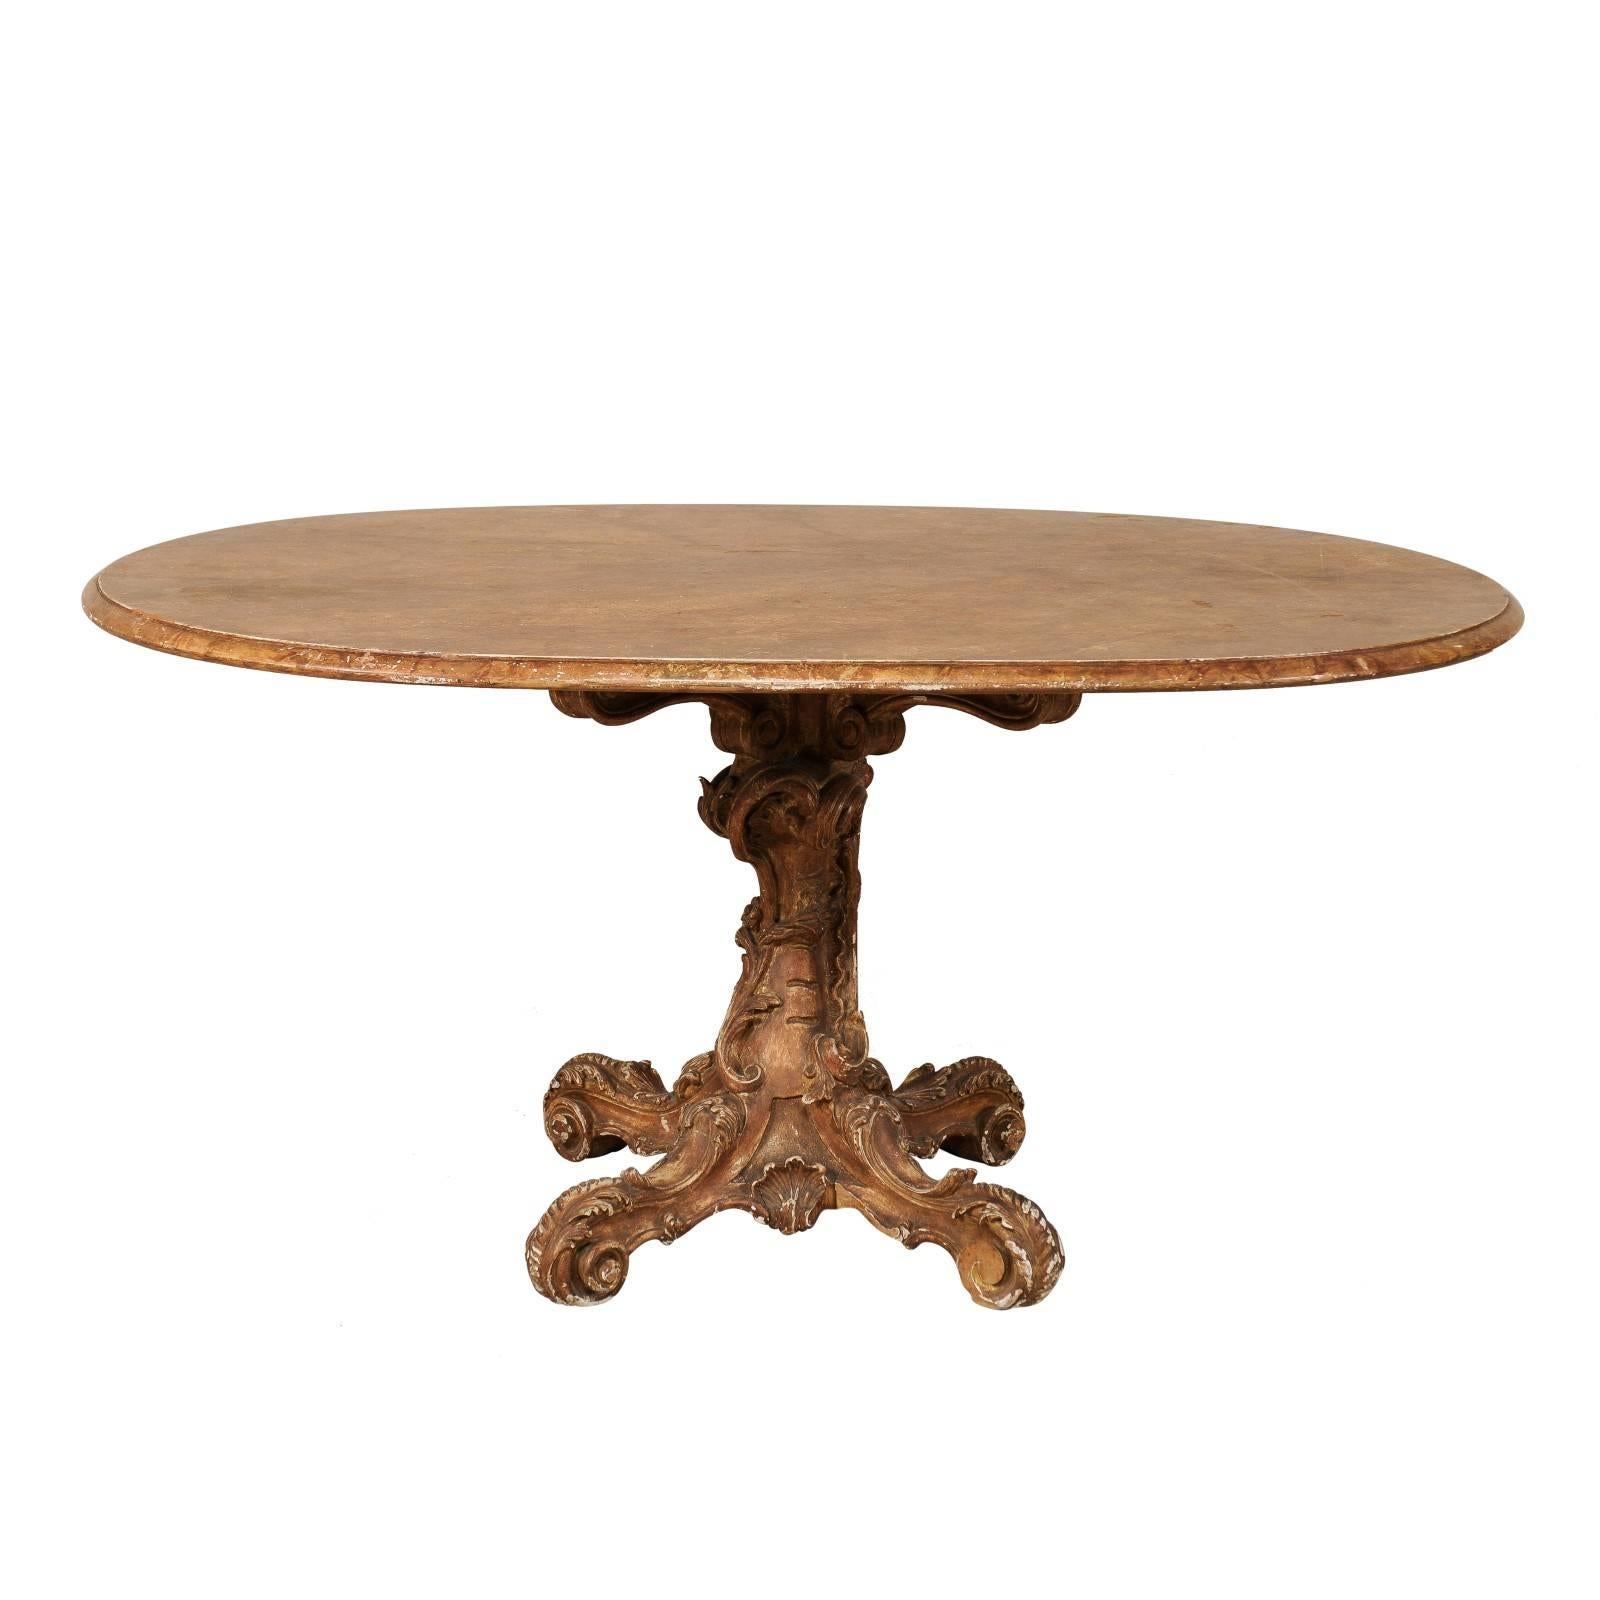 Italian 19th Century Oval Pedestal Table with Carved Wood Base in Warm Hues